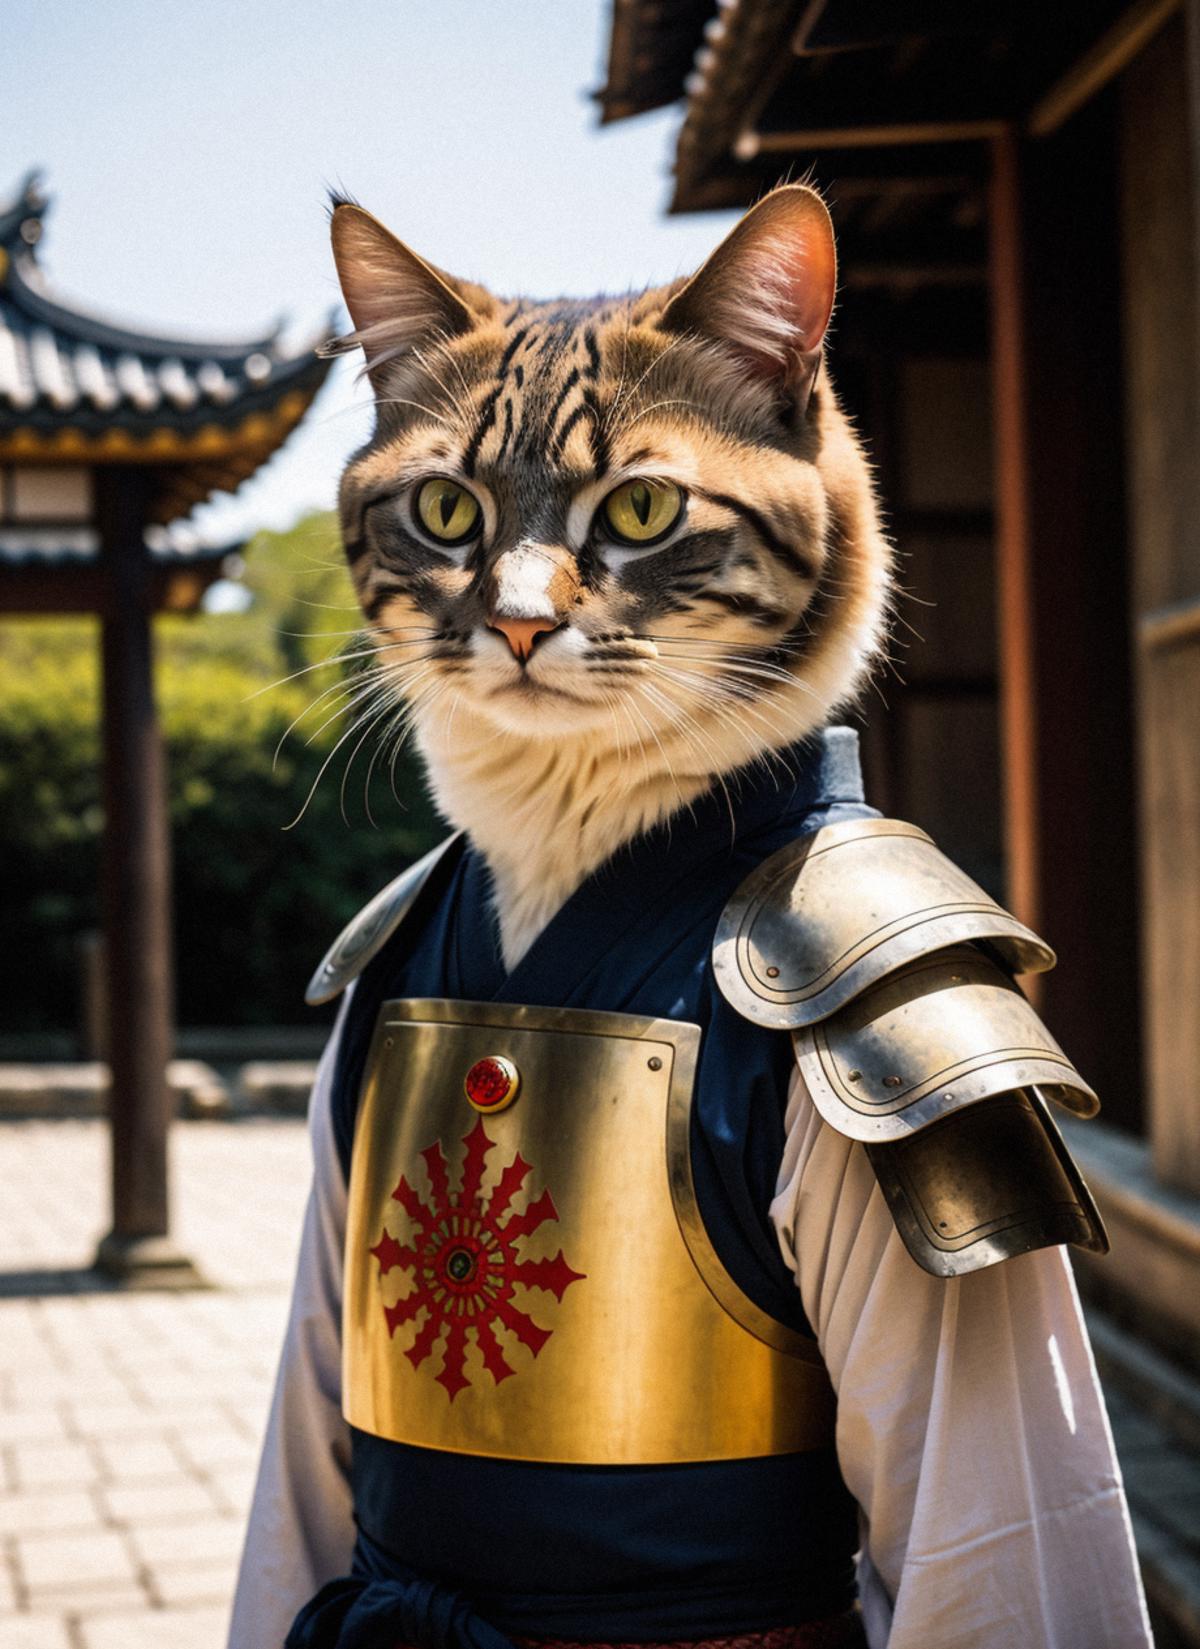 A cat wearing a gold armor with a sun emblem on its chest.